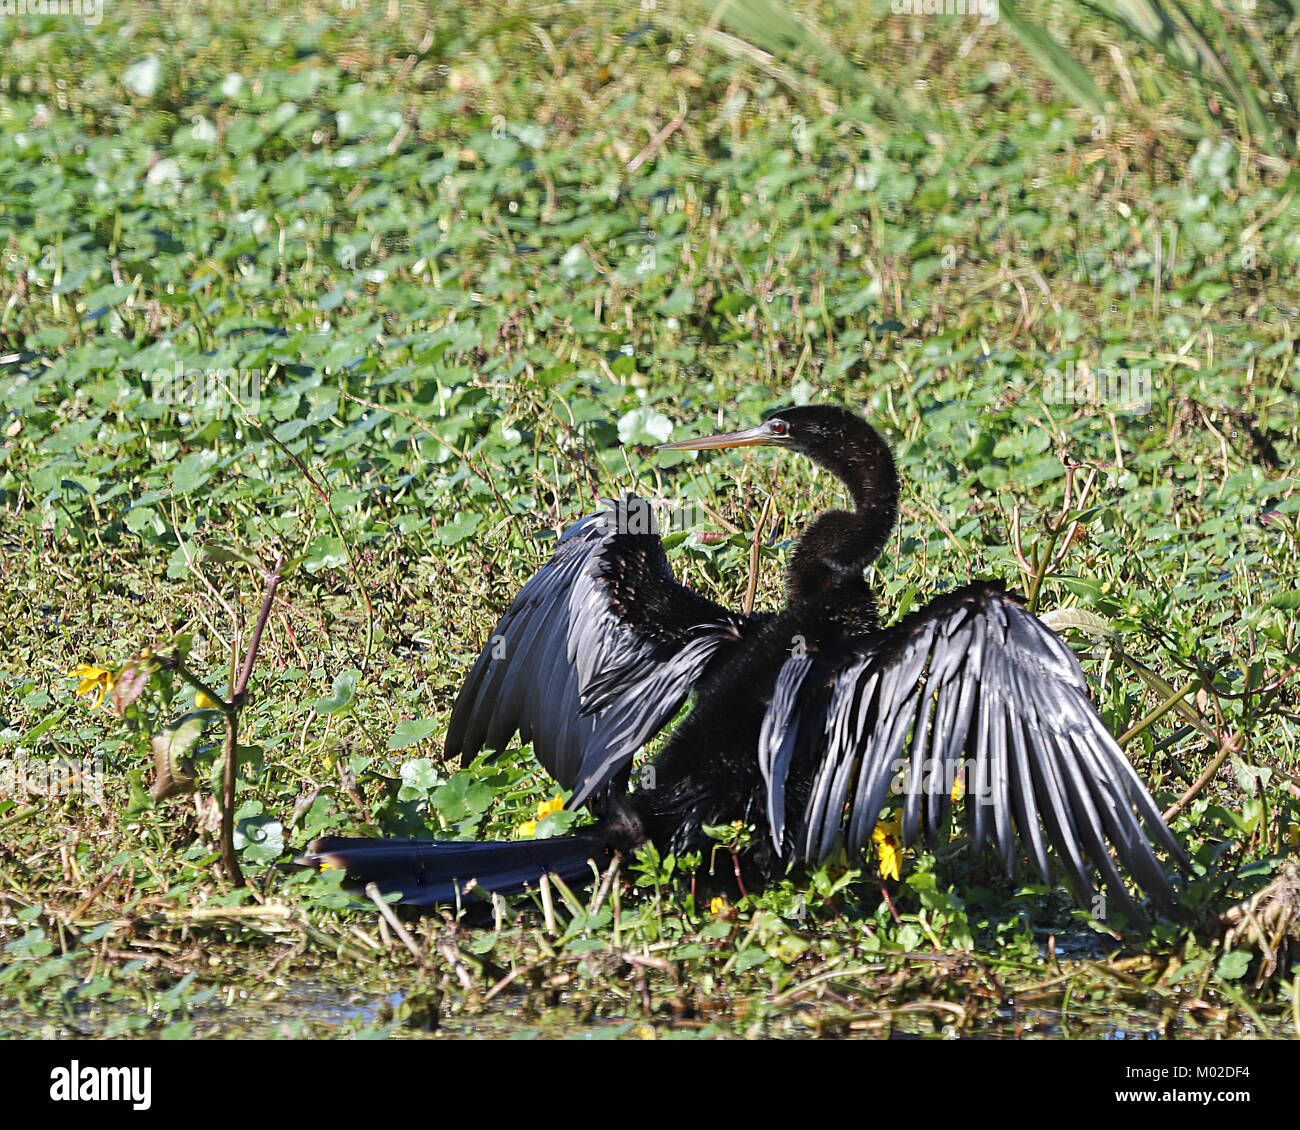 The Anhinga or American Darter does not have oil glands for waterproofing its feathers like most water birds so they are often seen drying their wings Stock Photo